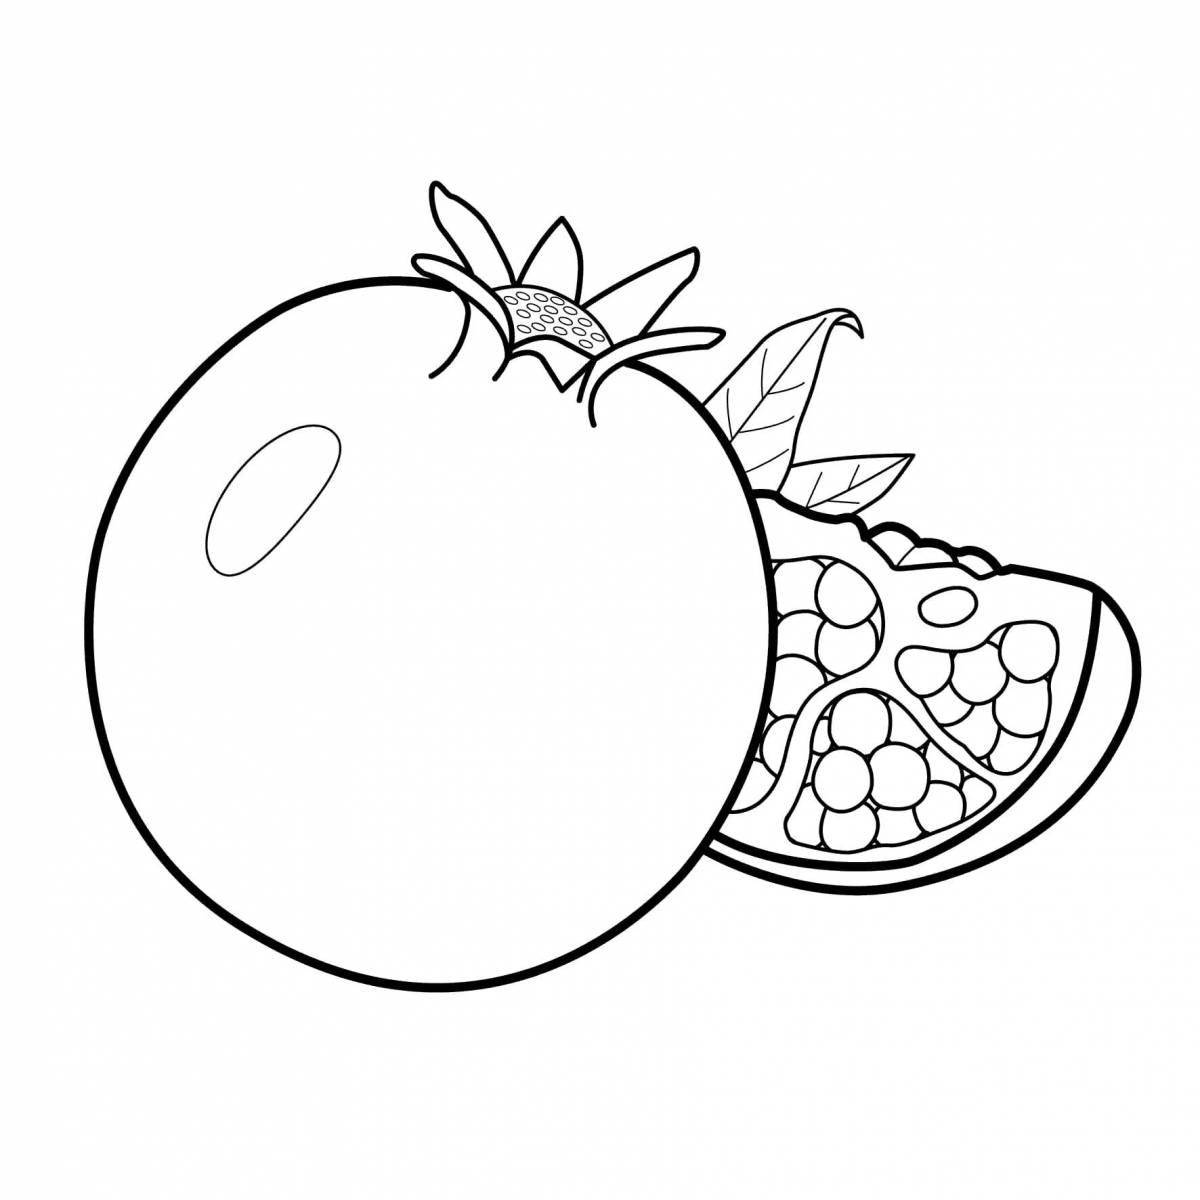 Colorful and fun fruit coloring pages for kids 5-6 years old